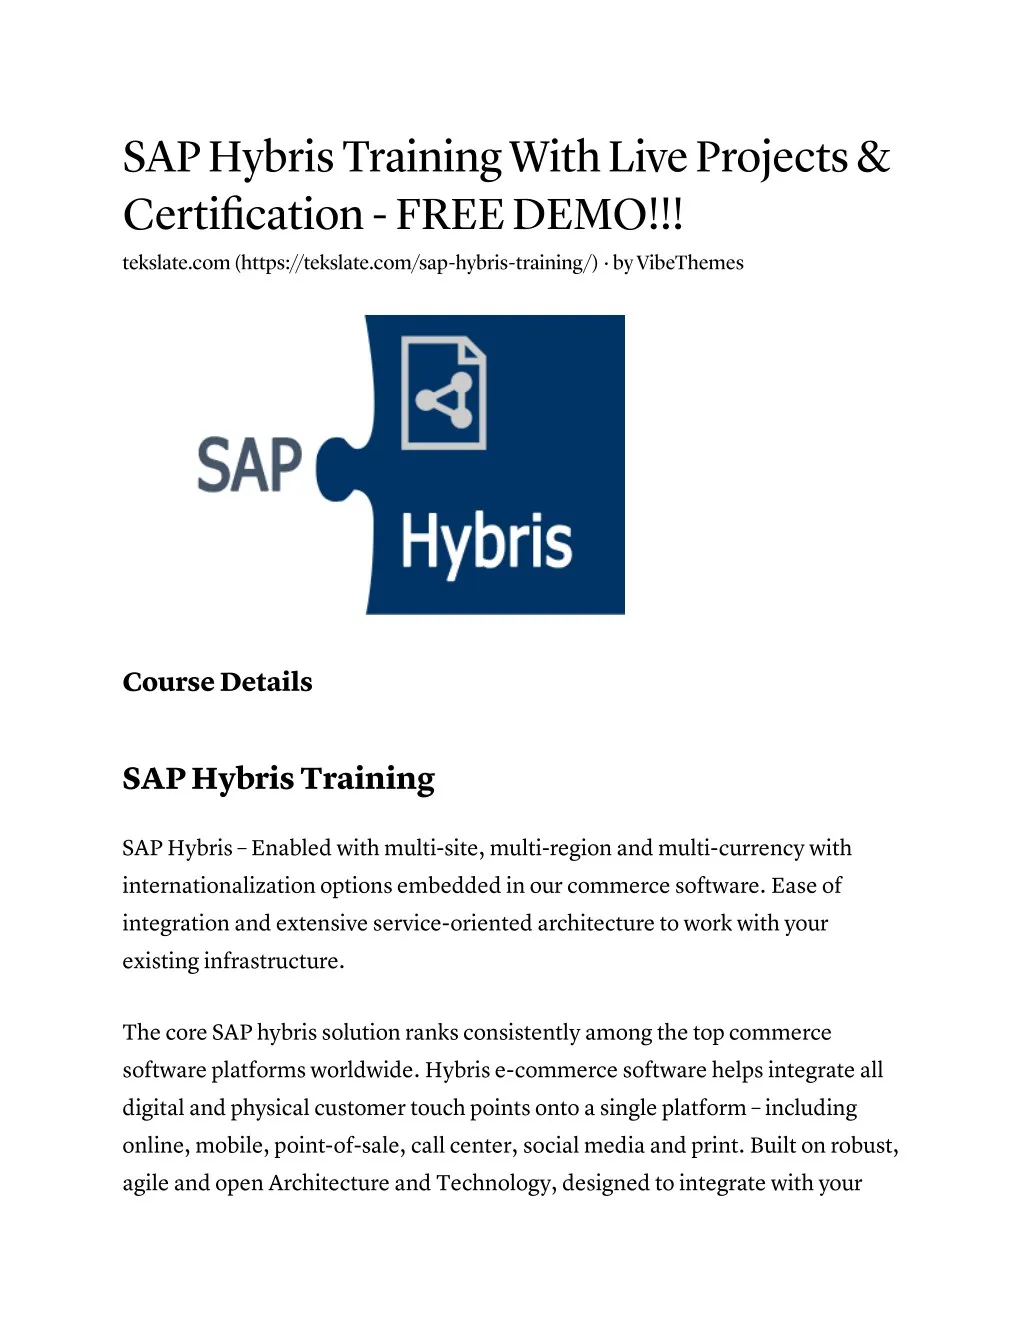 sap hybris training with live projects